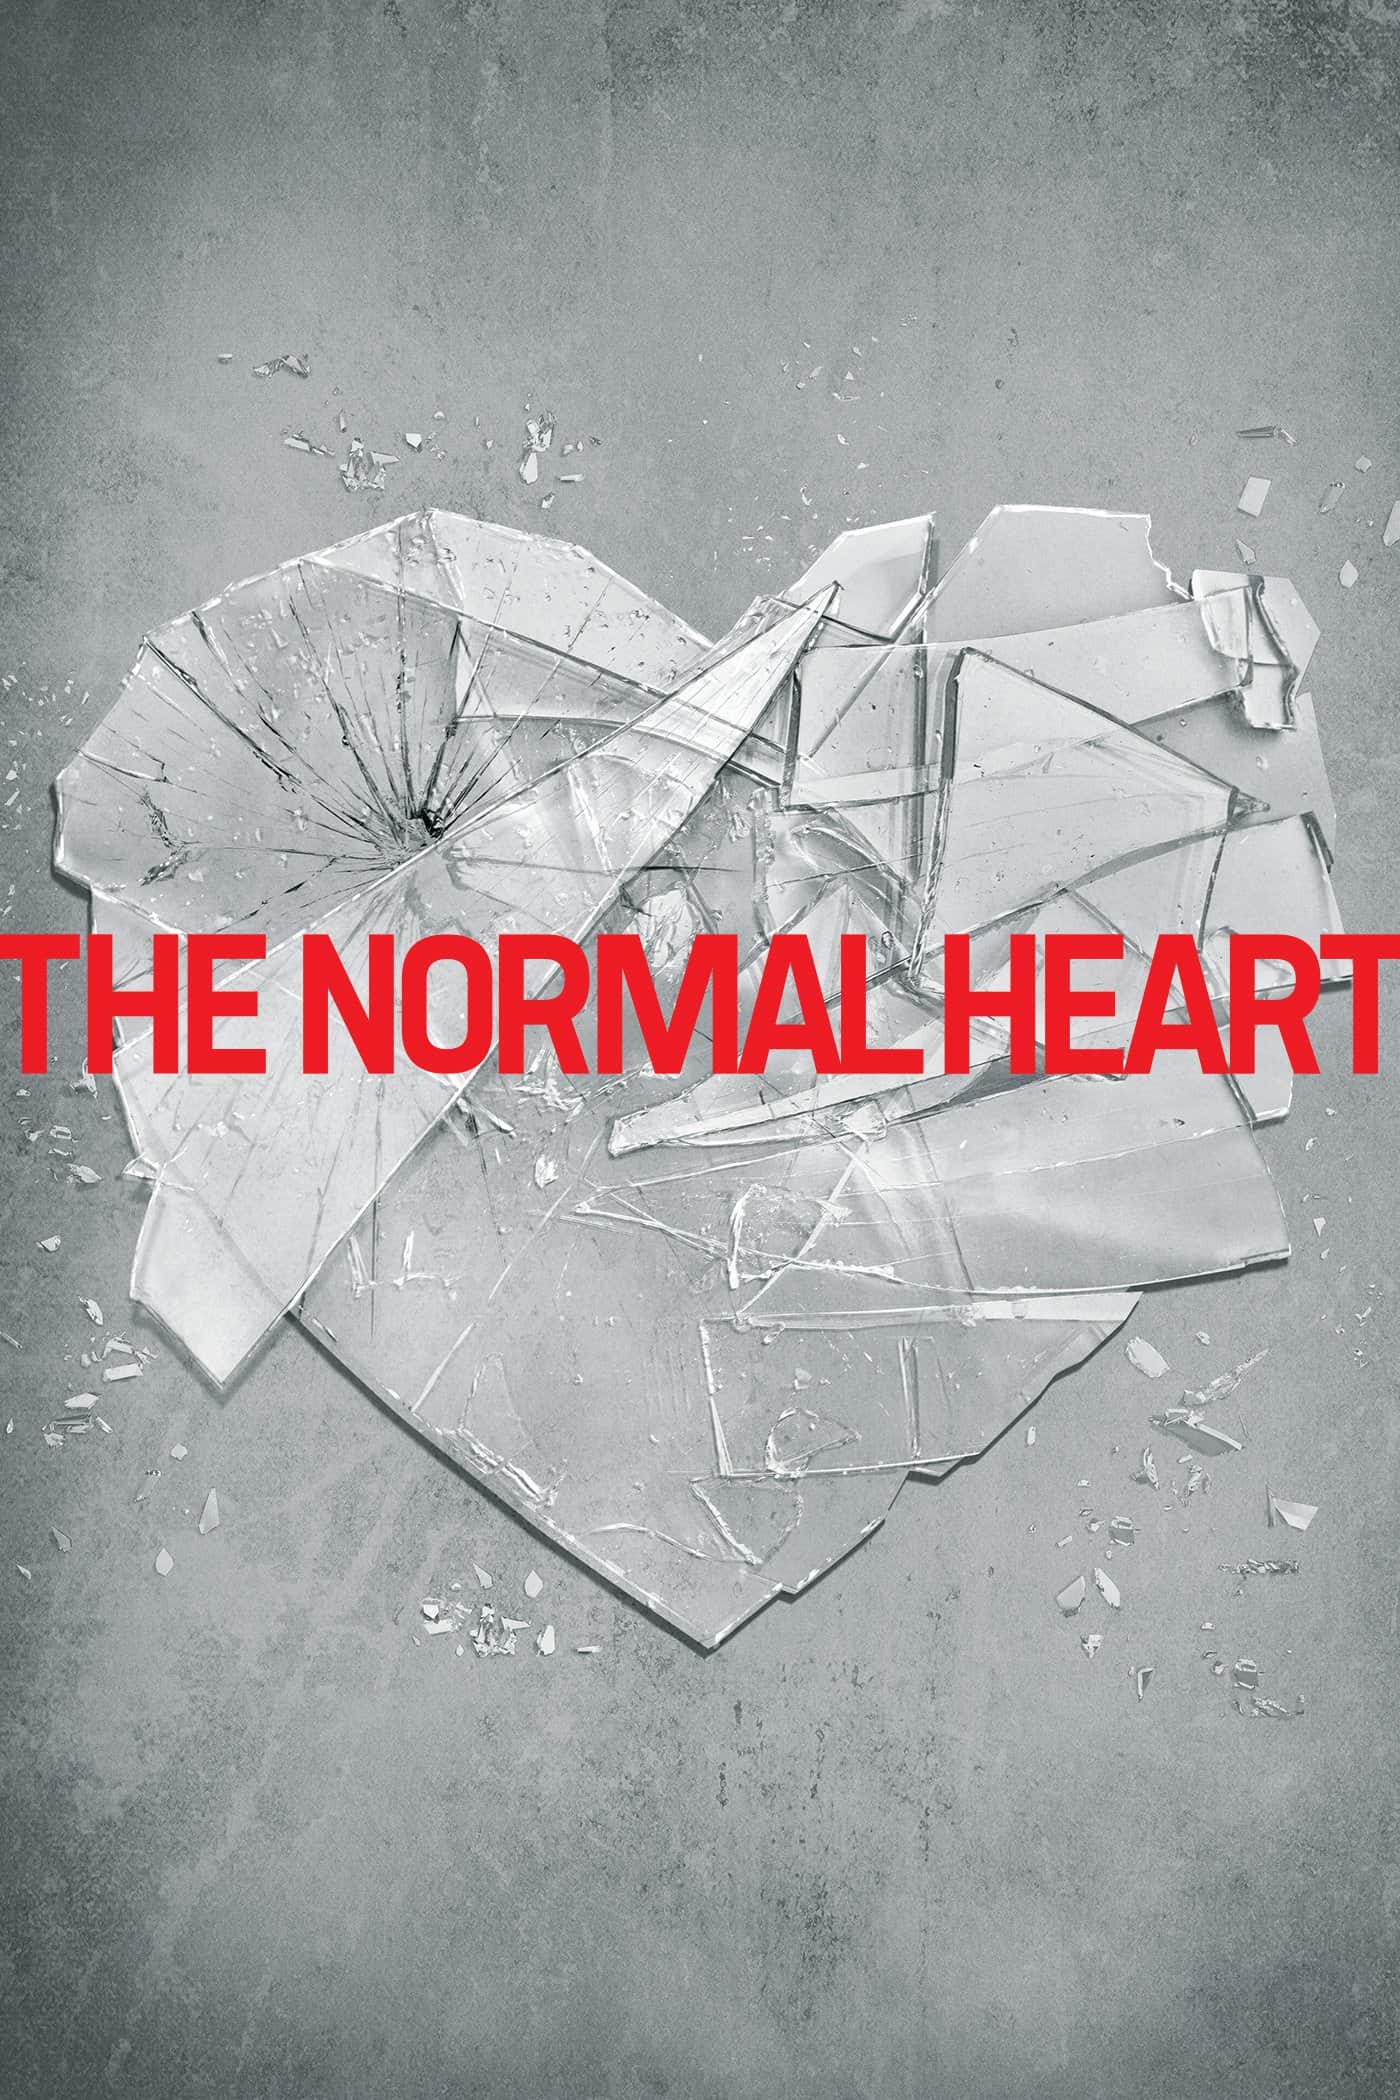 The Normal Heart, 2014 